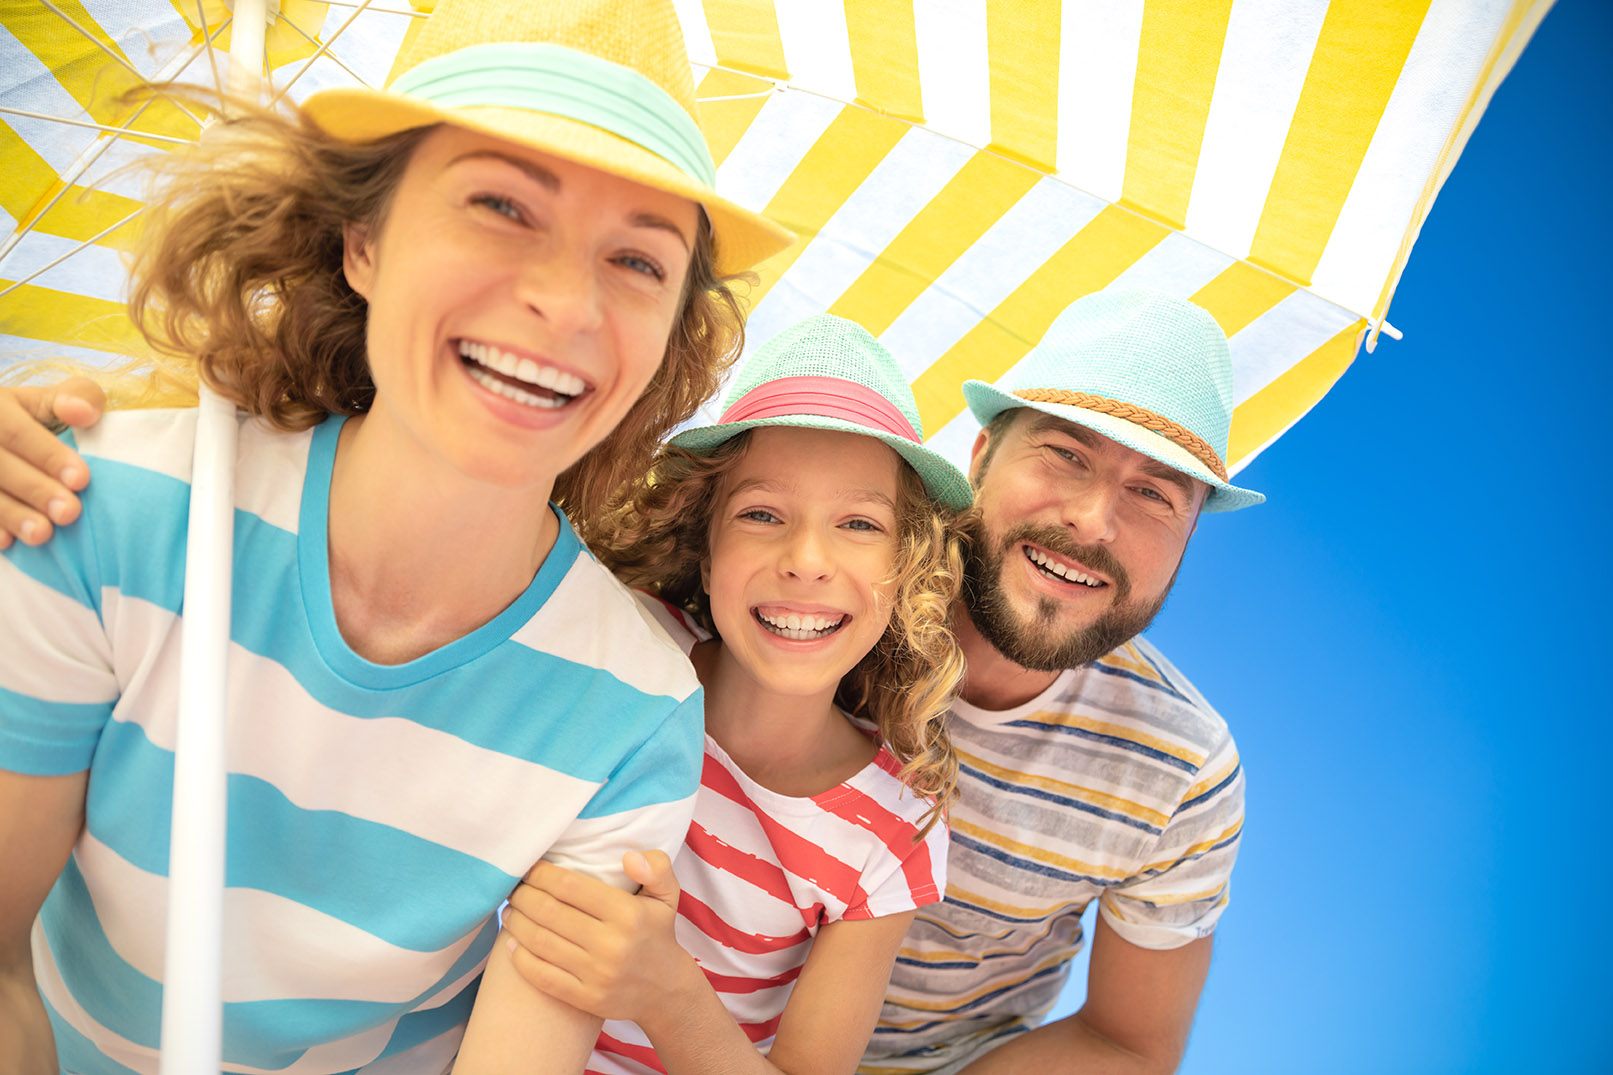 Happy family on summer vacation. Low angle view portrait of happy people against blue sky background